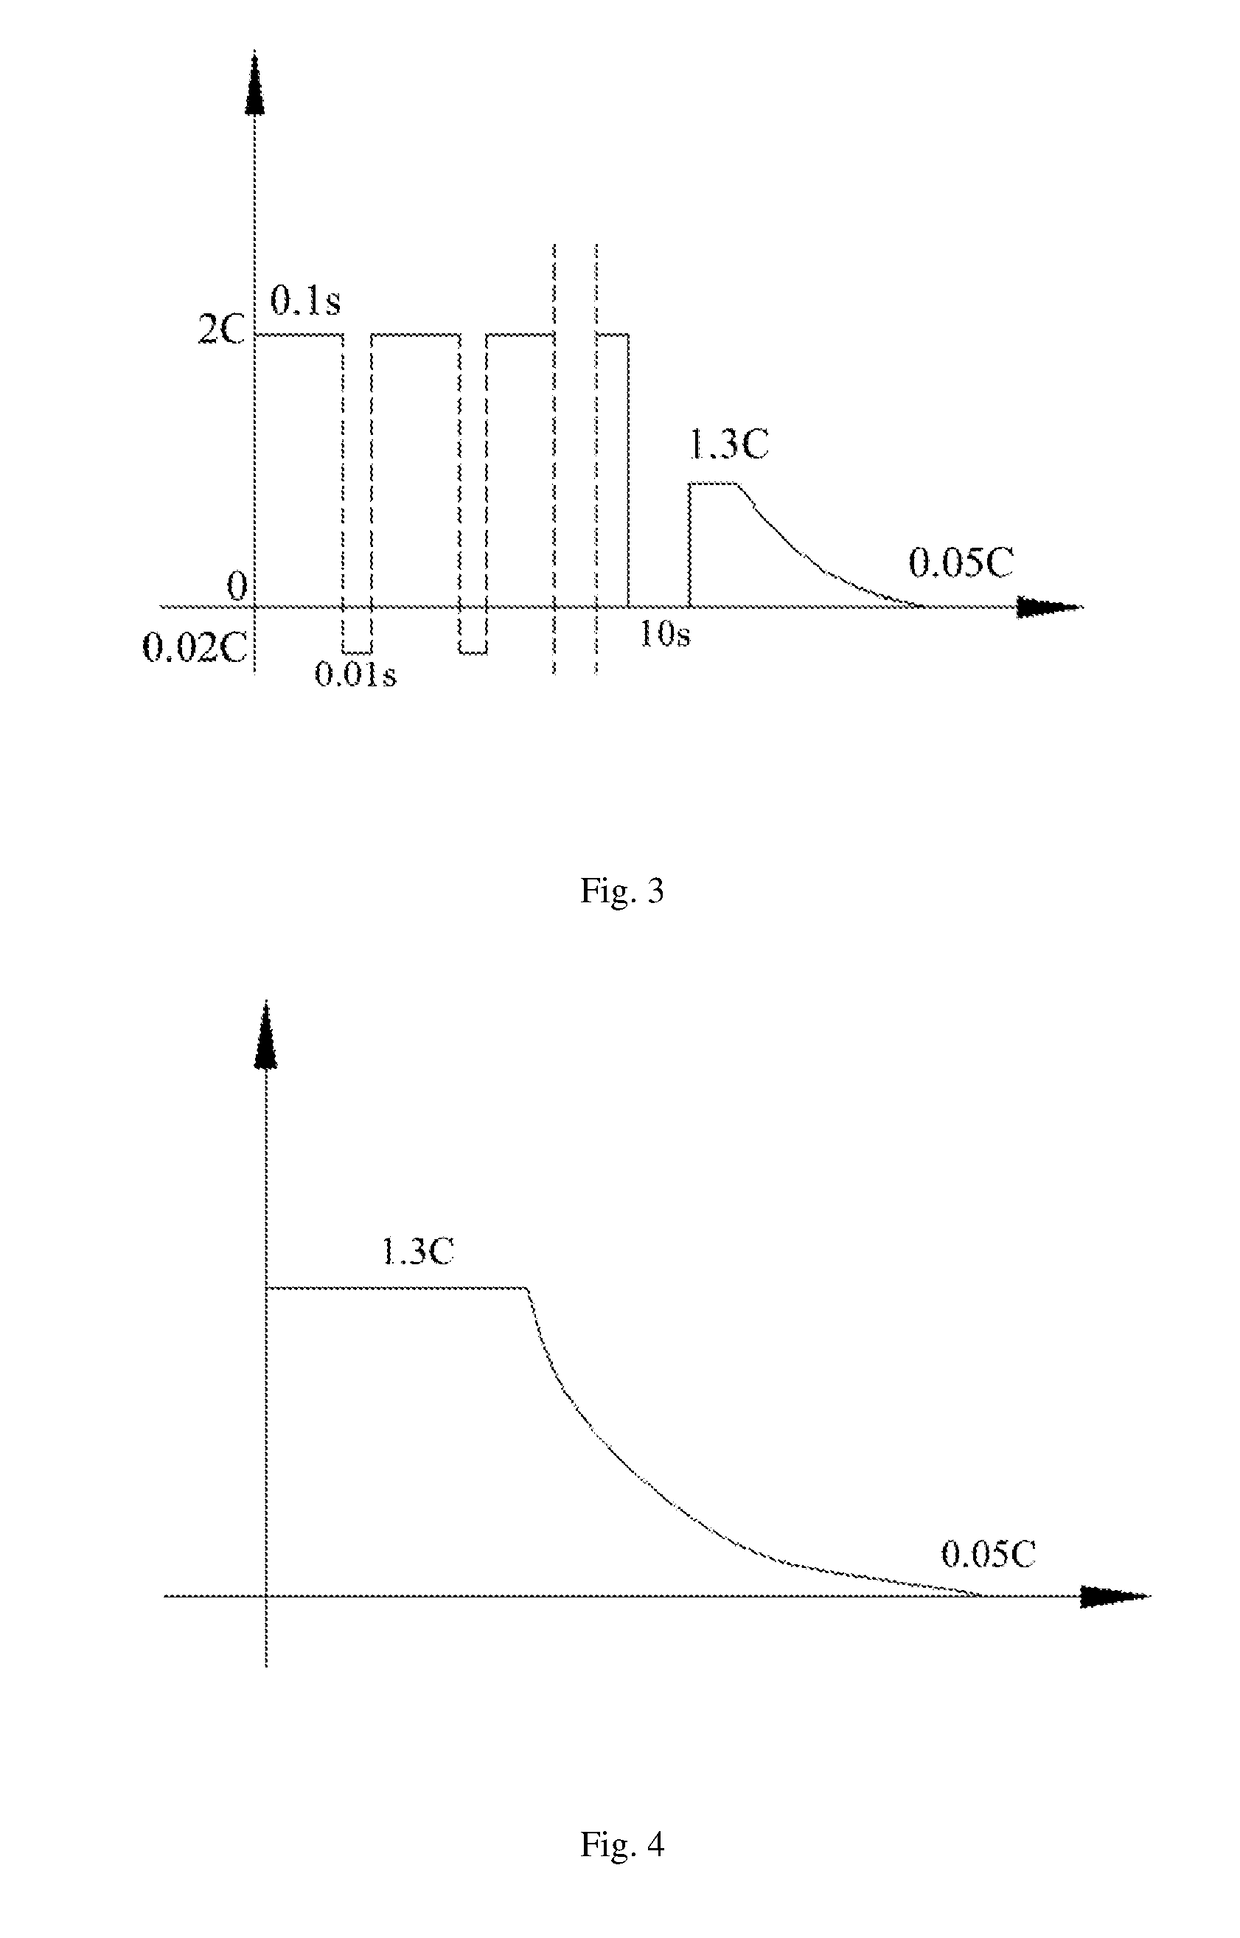 Method for charging a lithium ion battery